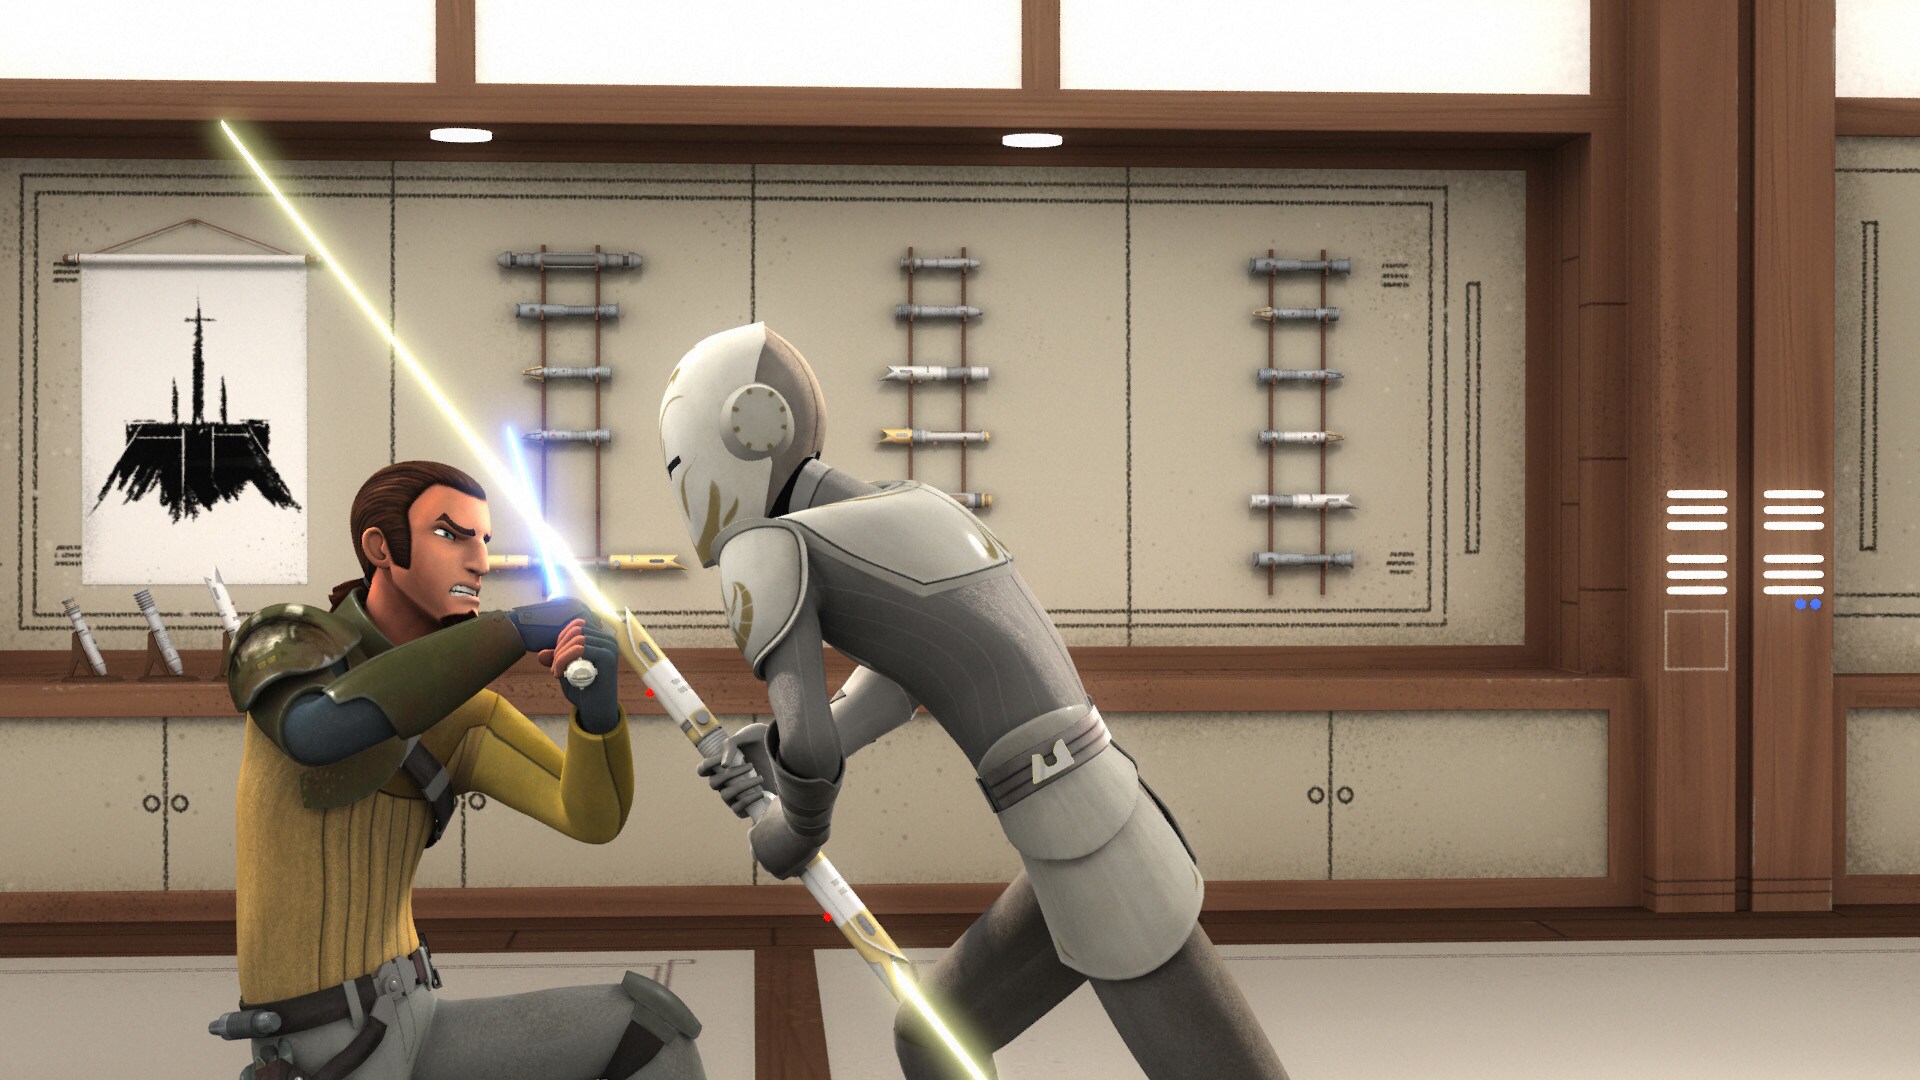 The Guard demands Kanan stand aside so he can destroy Ezra before he turns to the dark side. "I w...